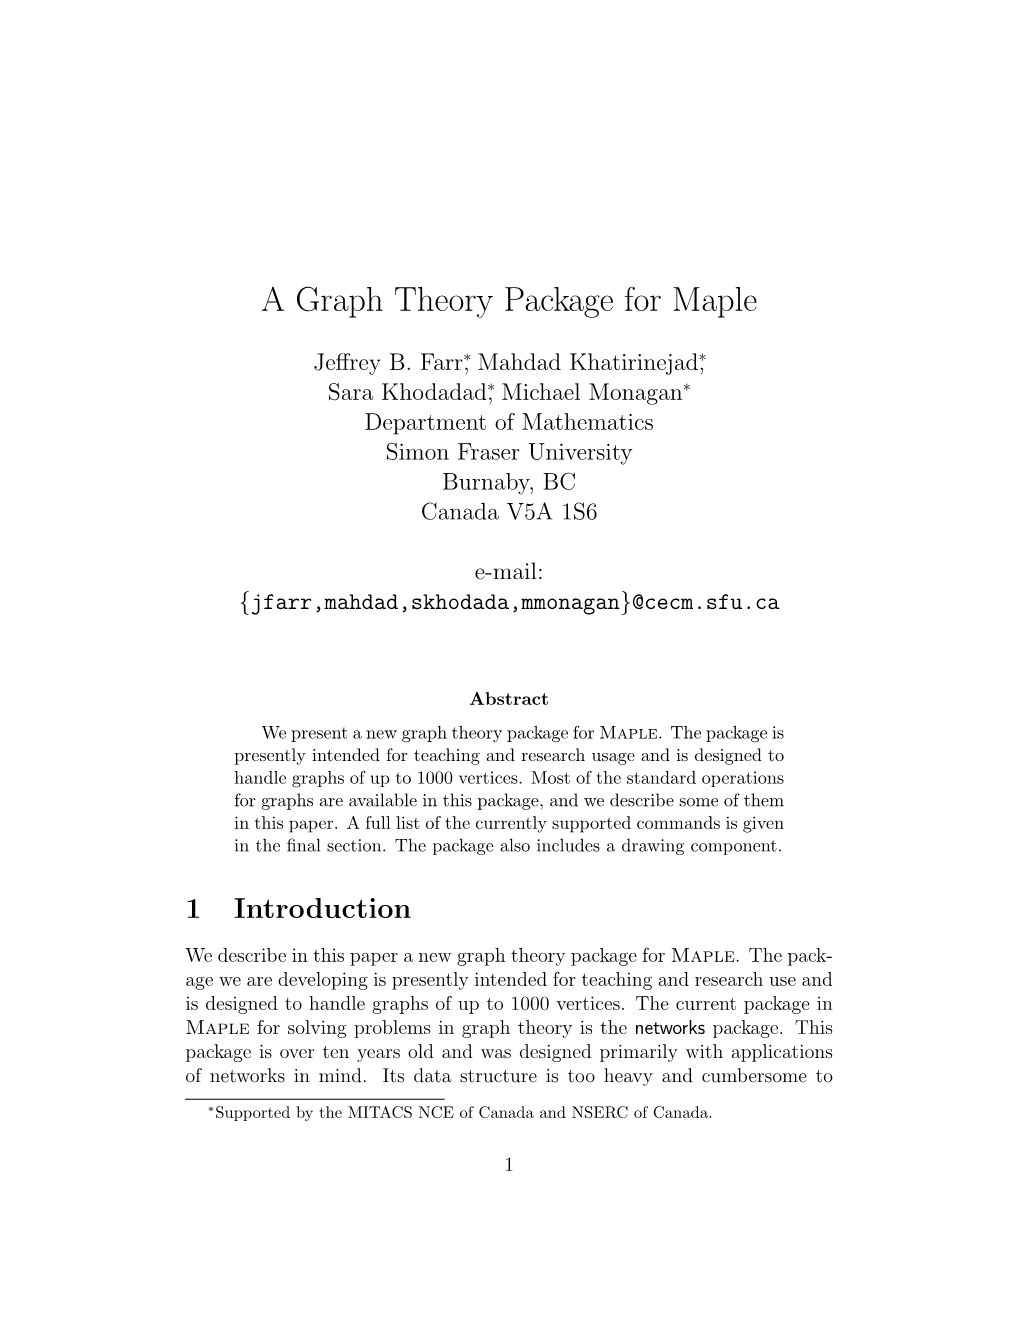 A Graph Theory Package for Maple